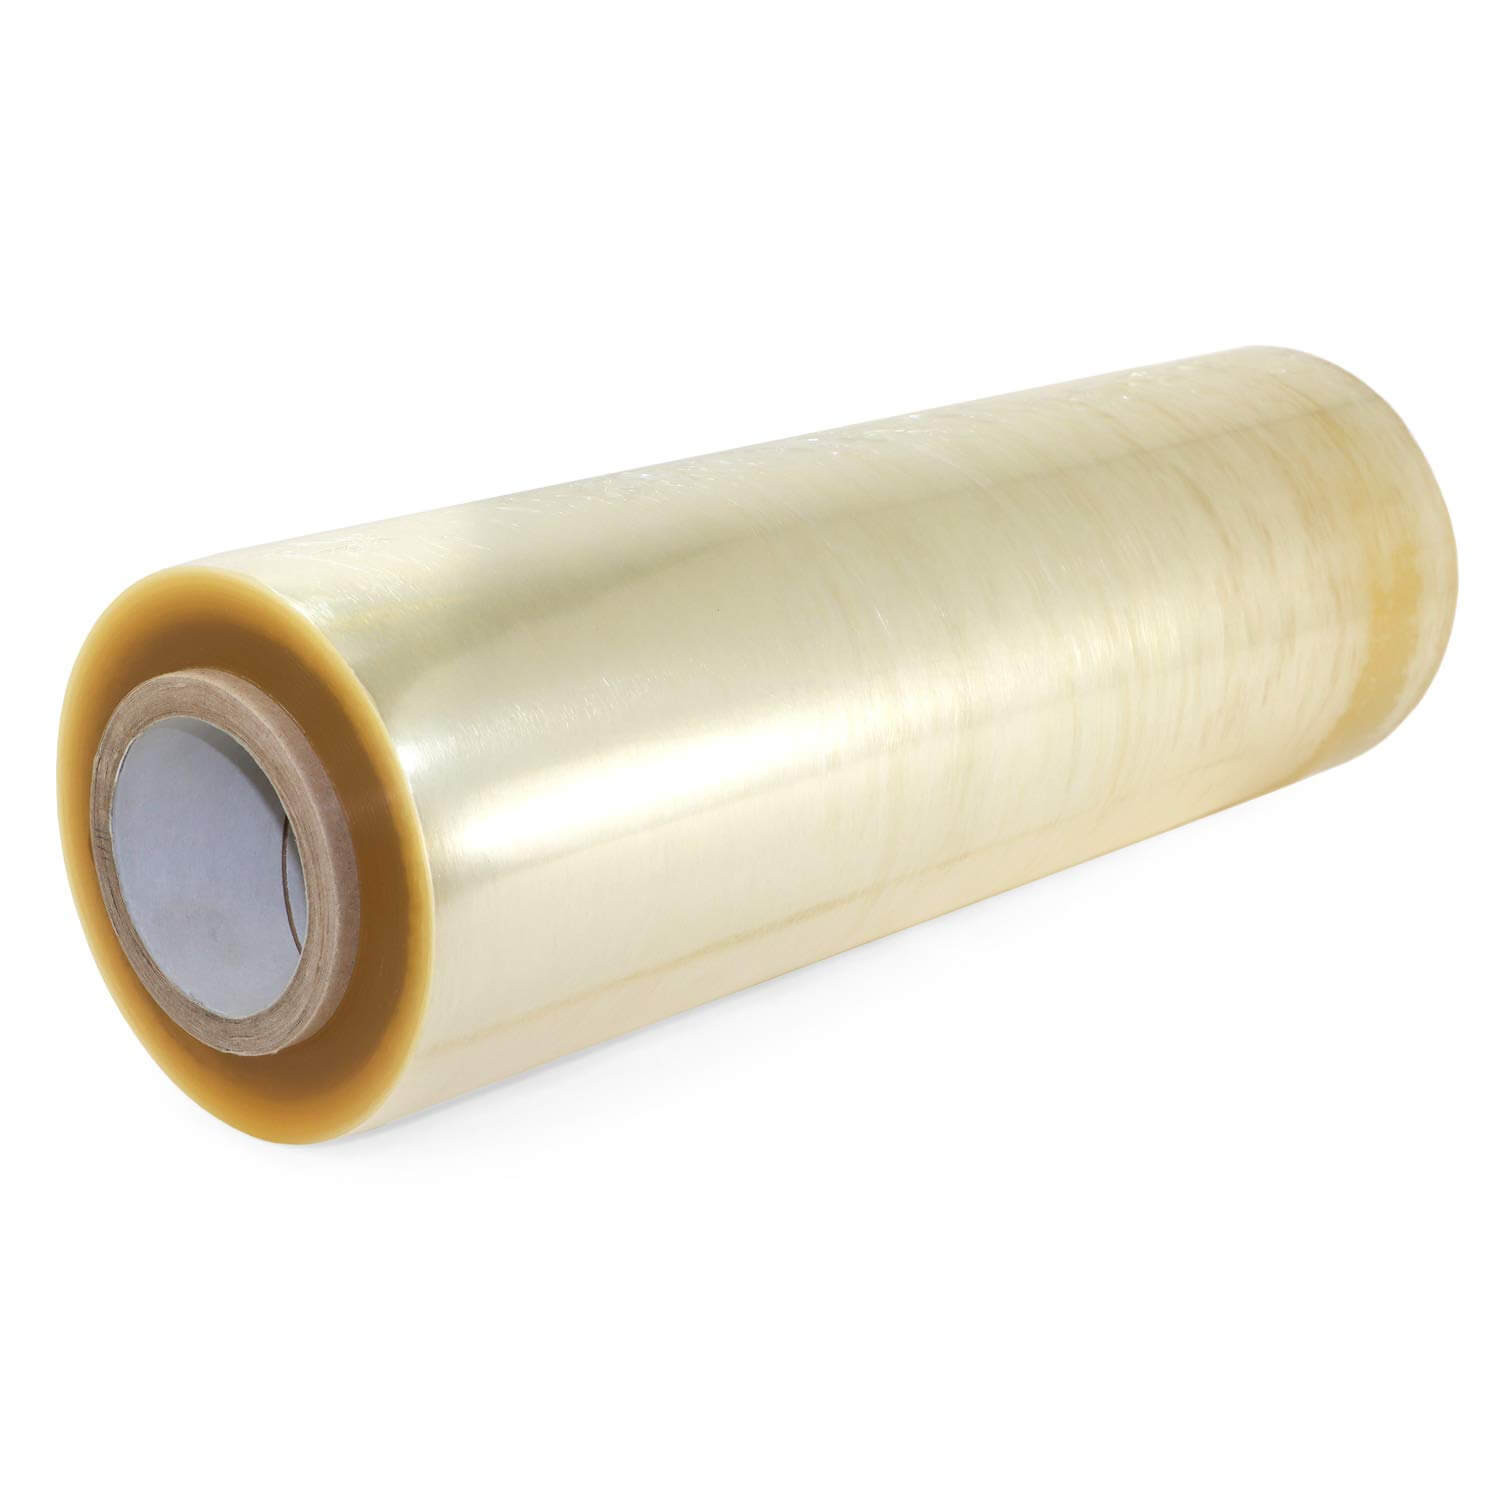 Plastic Wrap Cling Film Food, Wrapmaster 3000 Cling Film